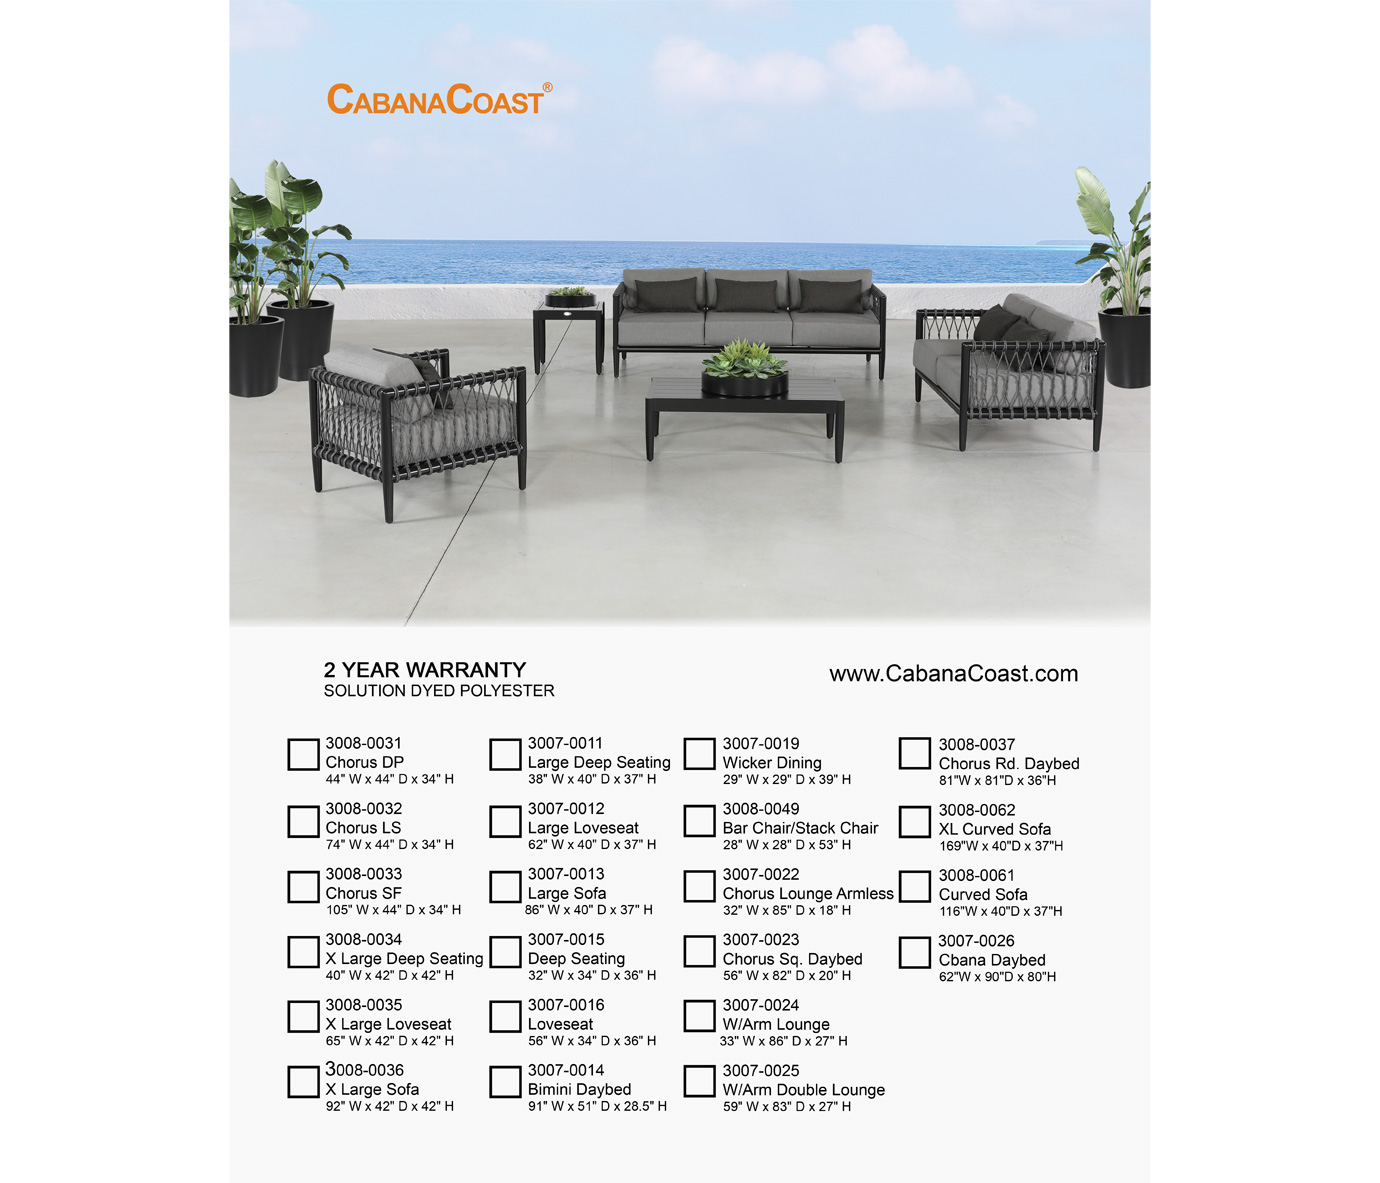 Chairs loveseats Sofas Patio Furniture Covers